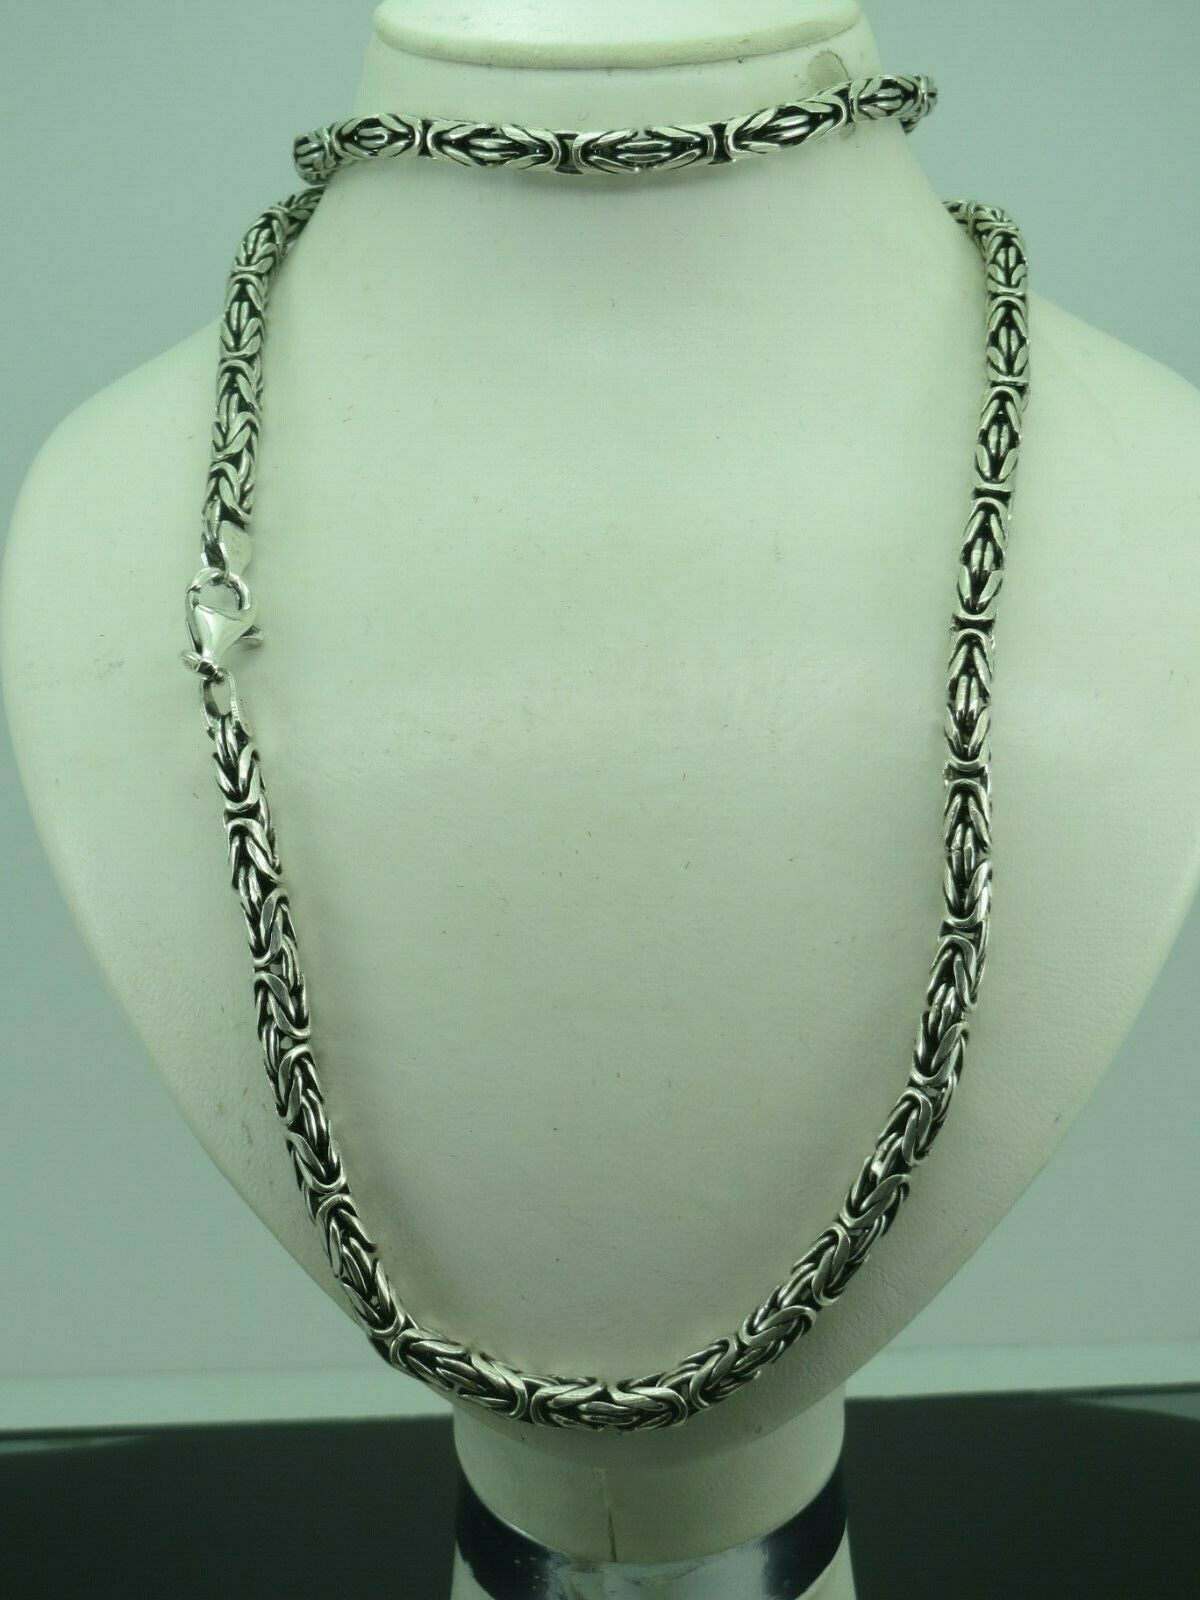 Free Shipping 925 Sterling Silver Necklace Men - 925 Sterling